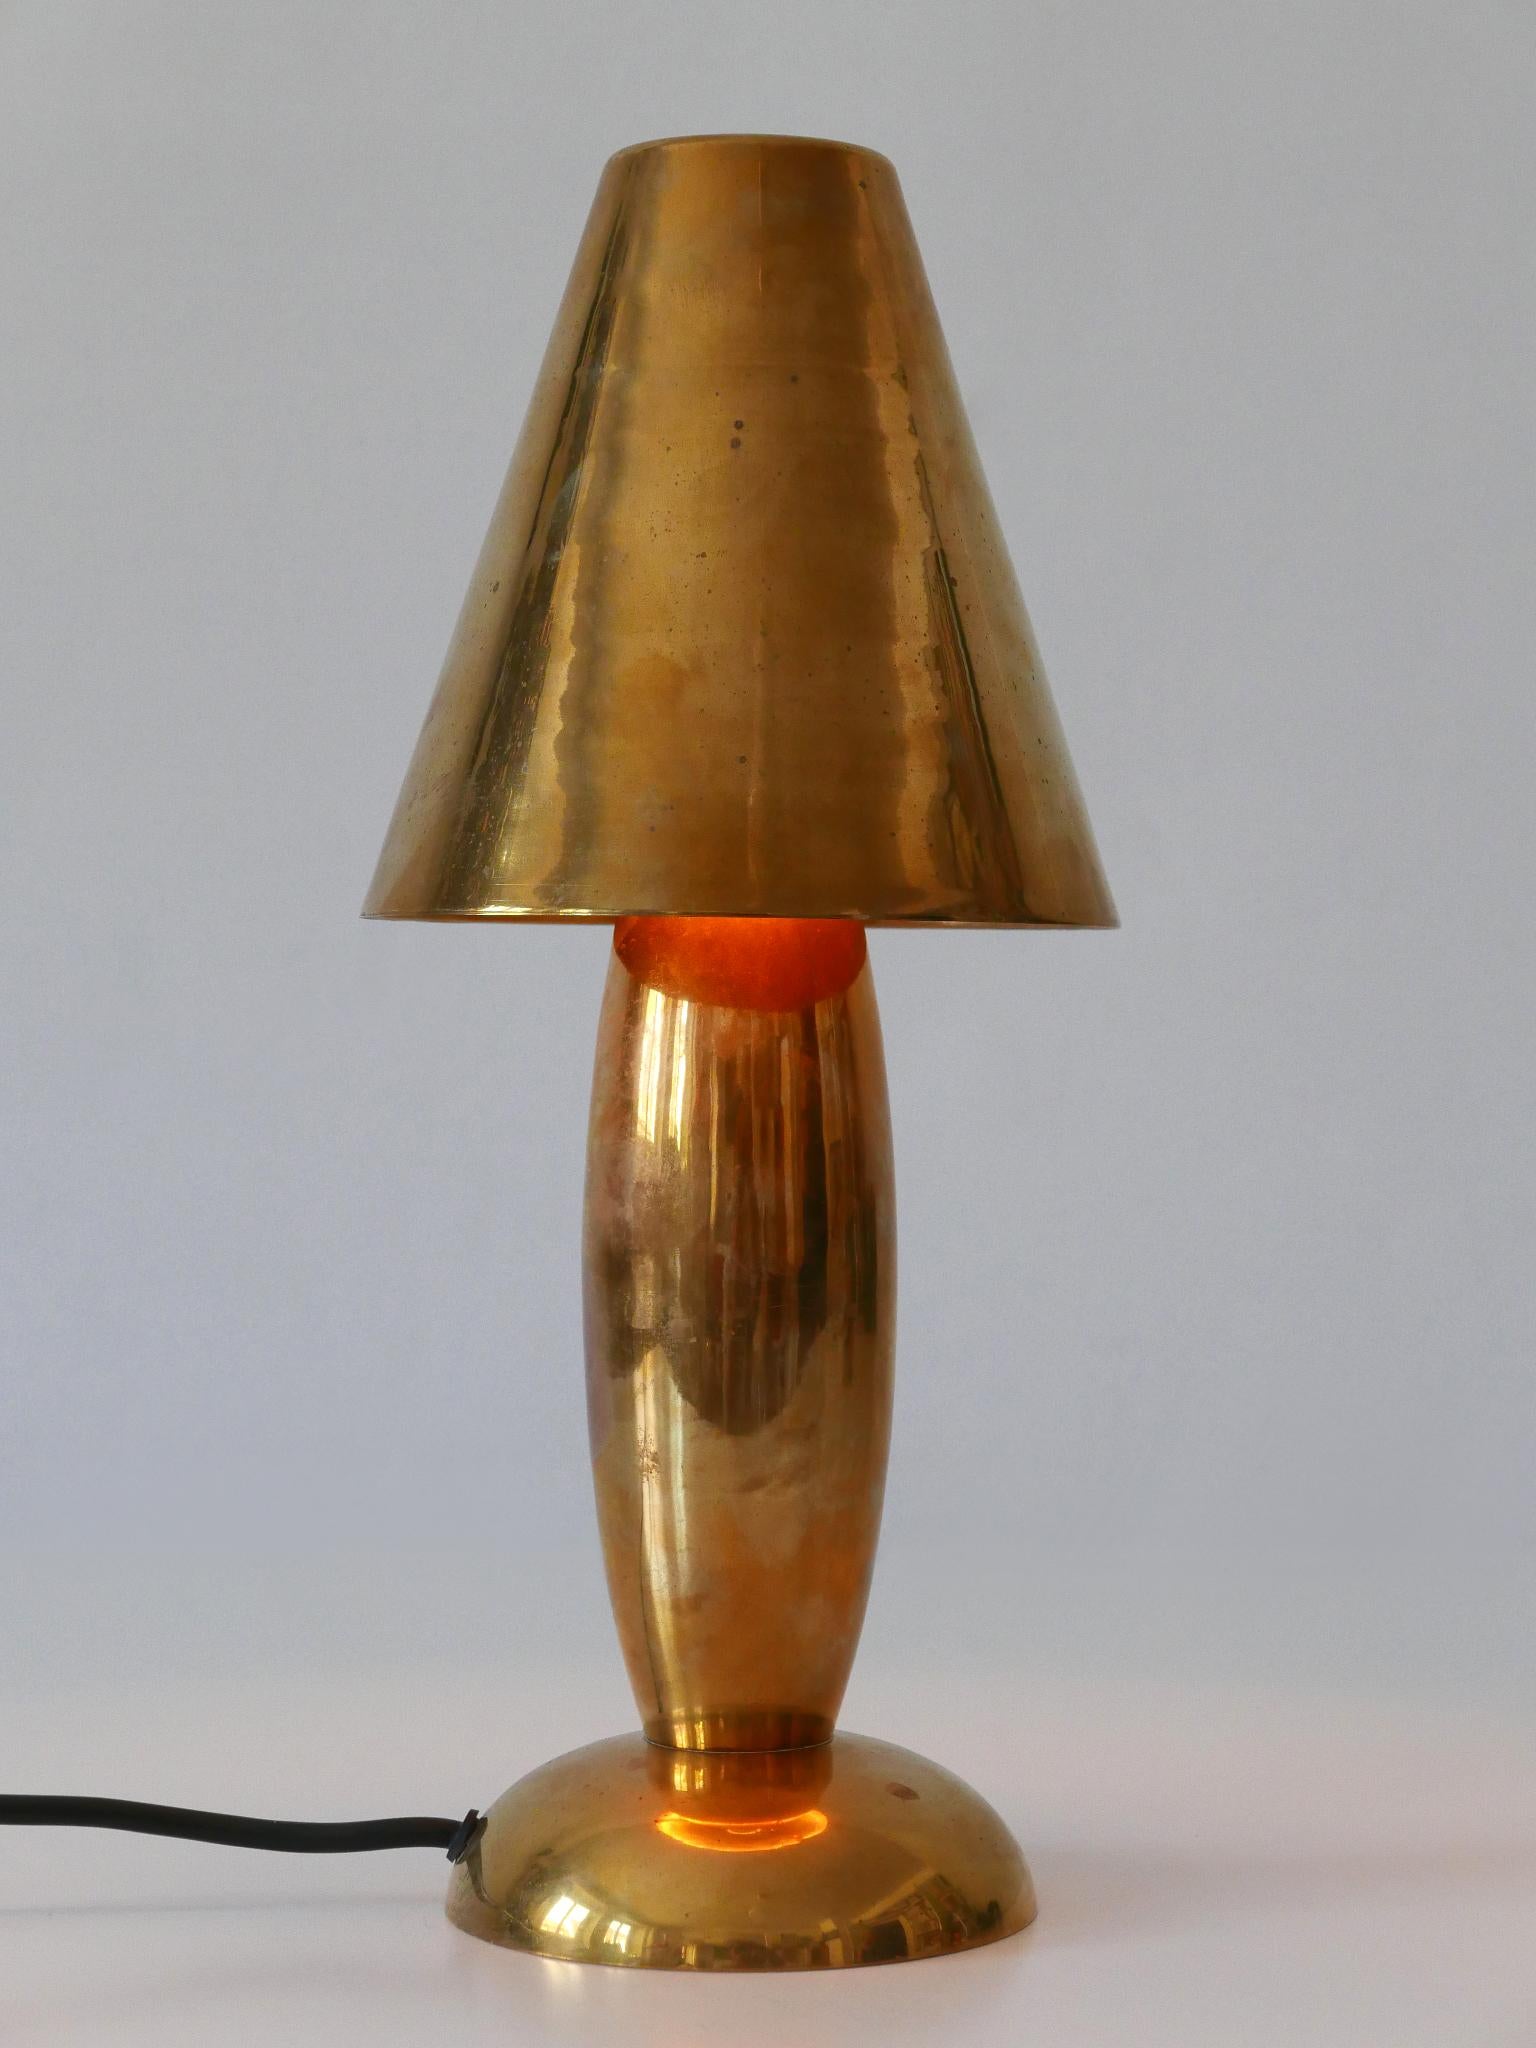 Rare & Lovely Mid-Century Modern Brass Side Table Lamp by Lambert Germany 1970s For Sale 6